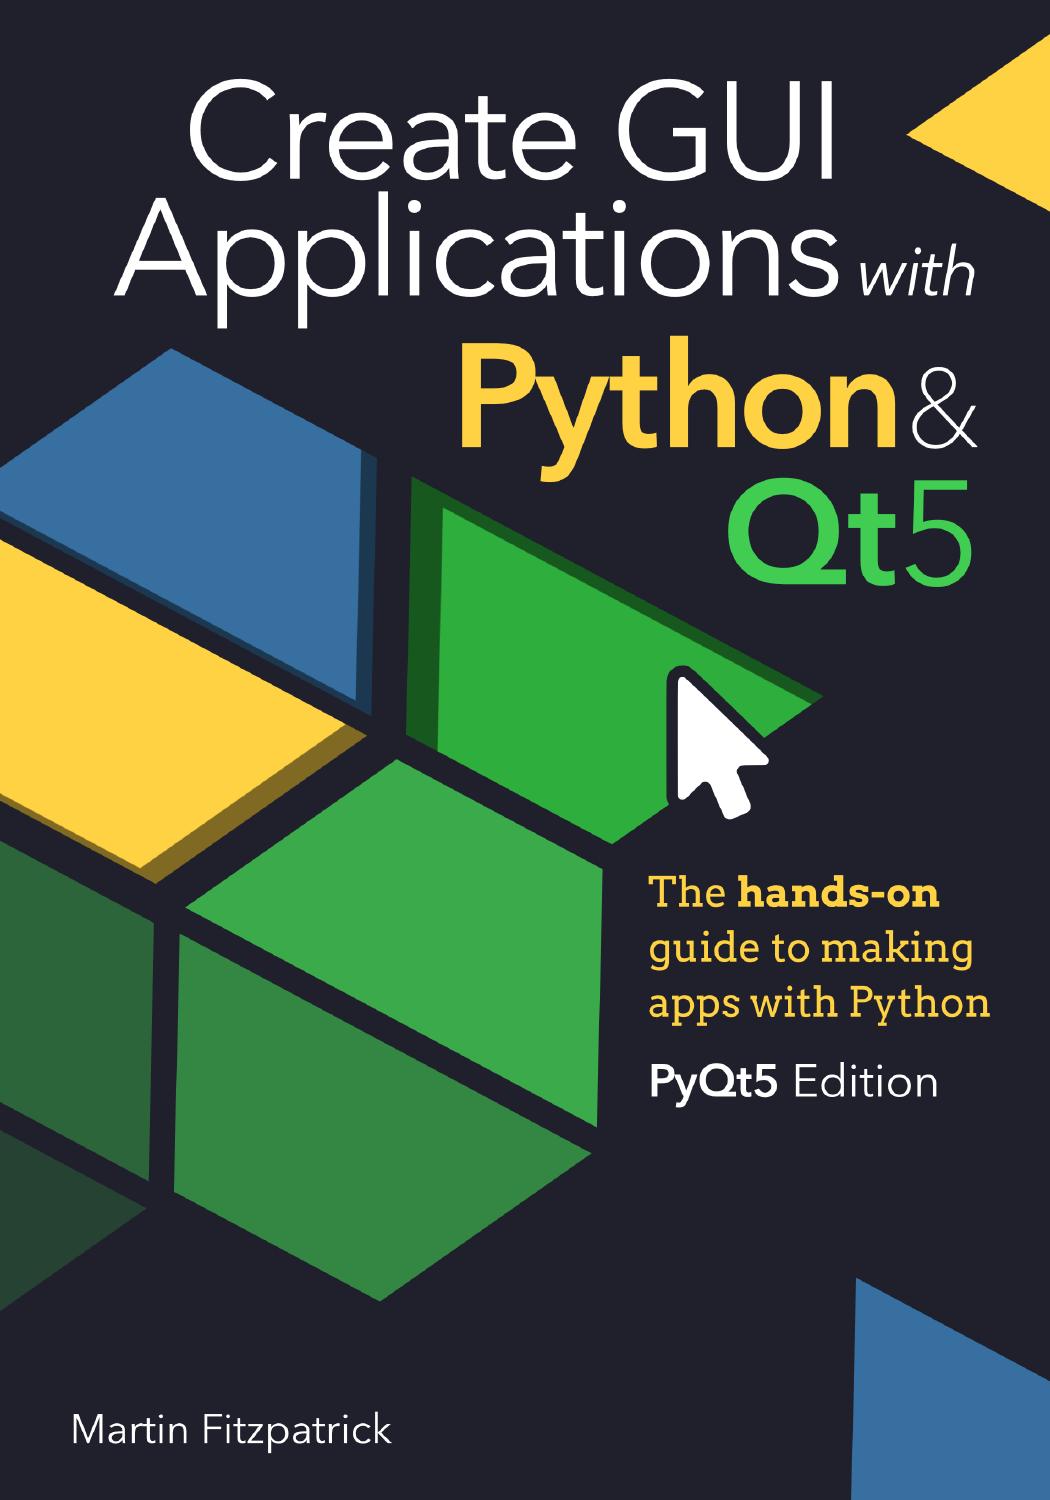 Create GUI Applications with Python & Qt5: The hands-on guide to making apps with Python